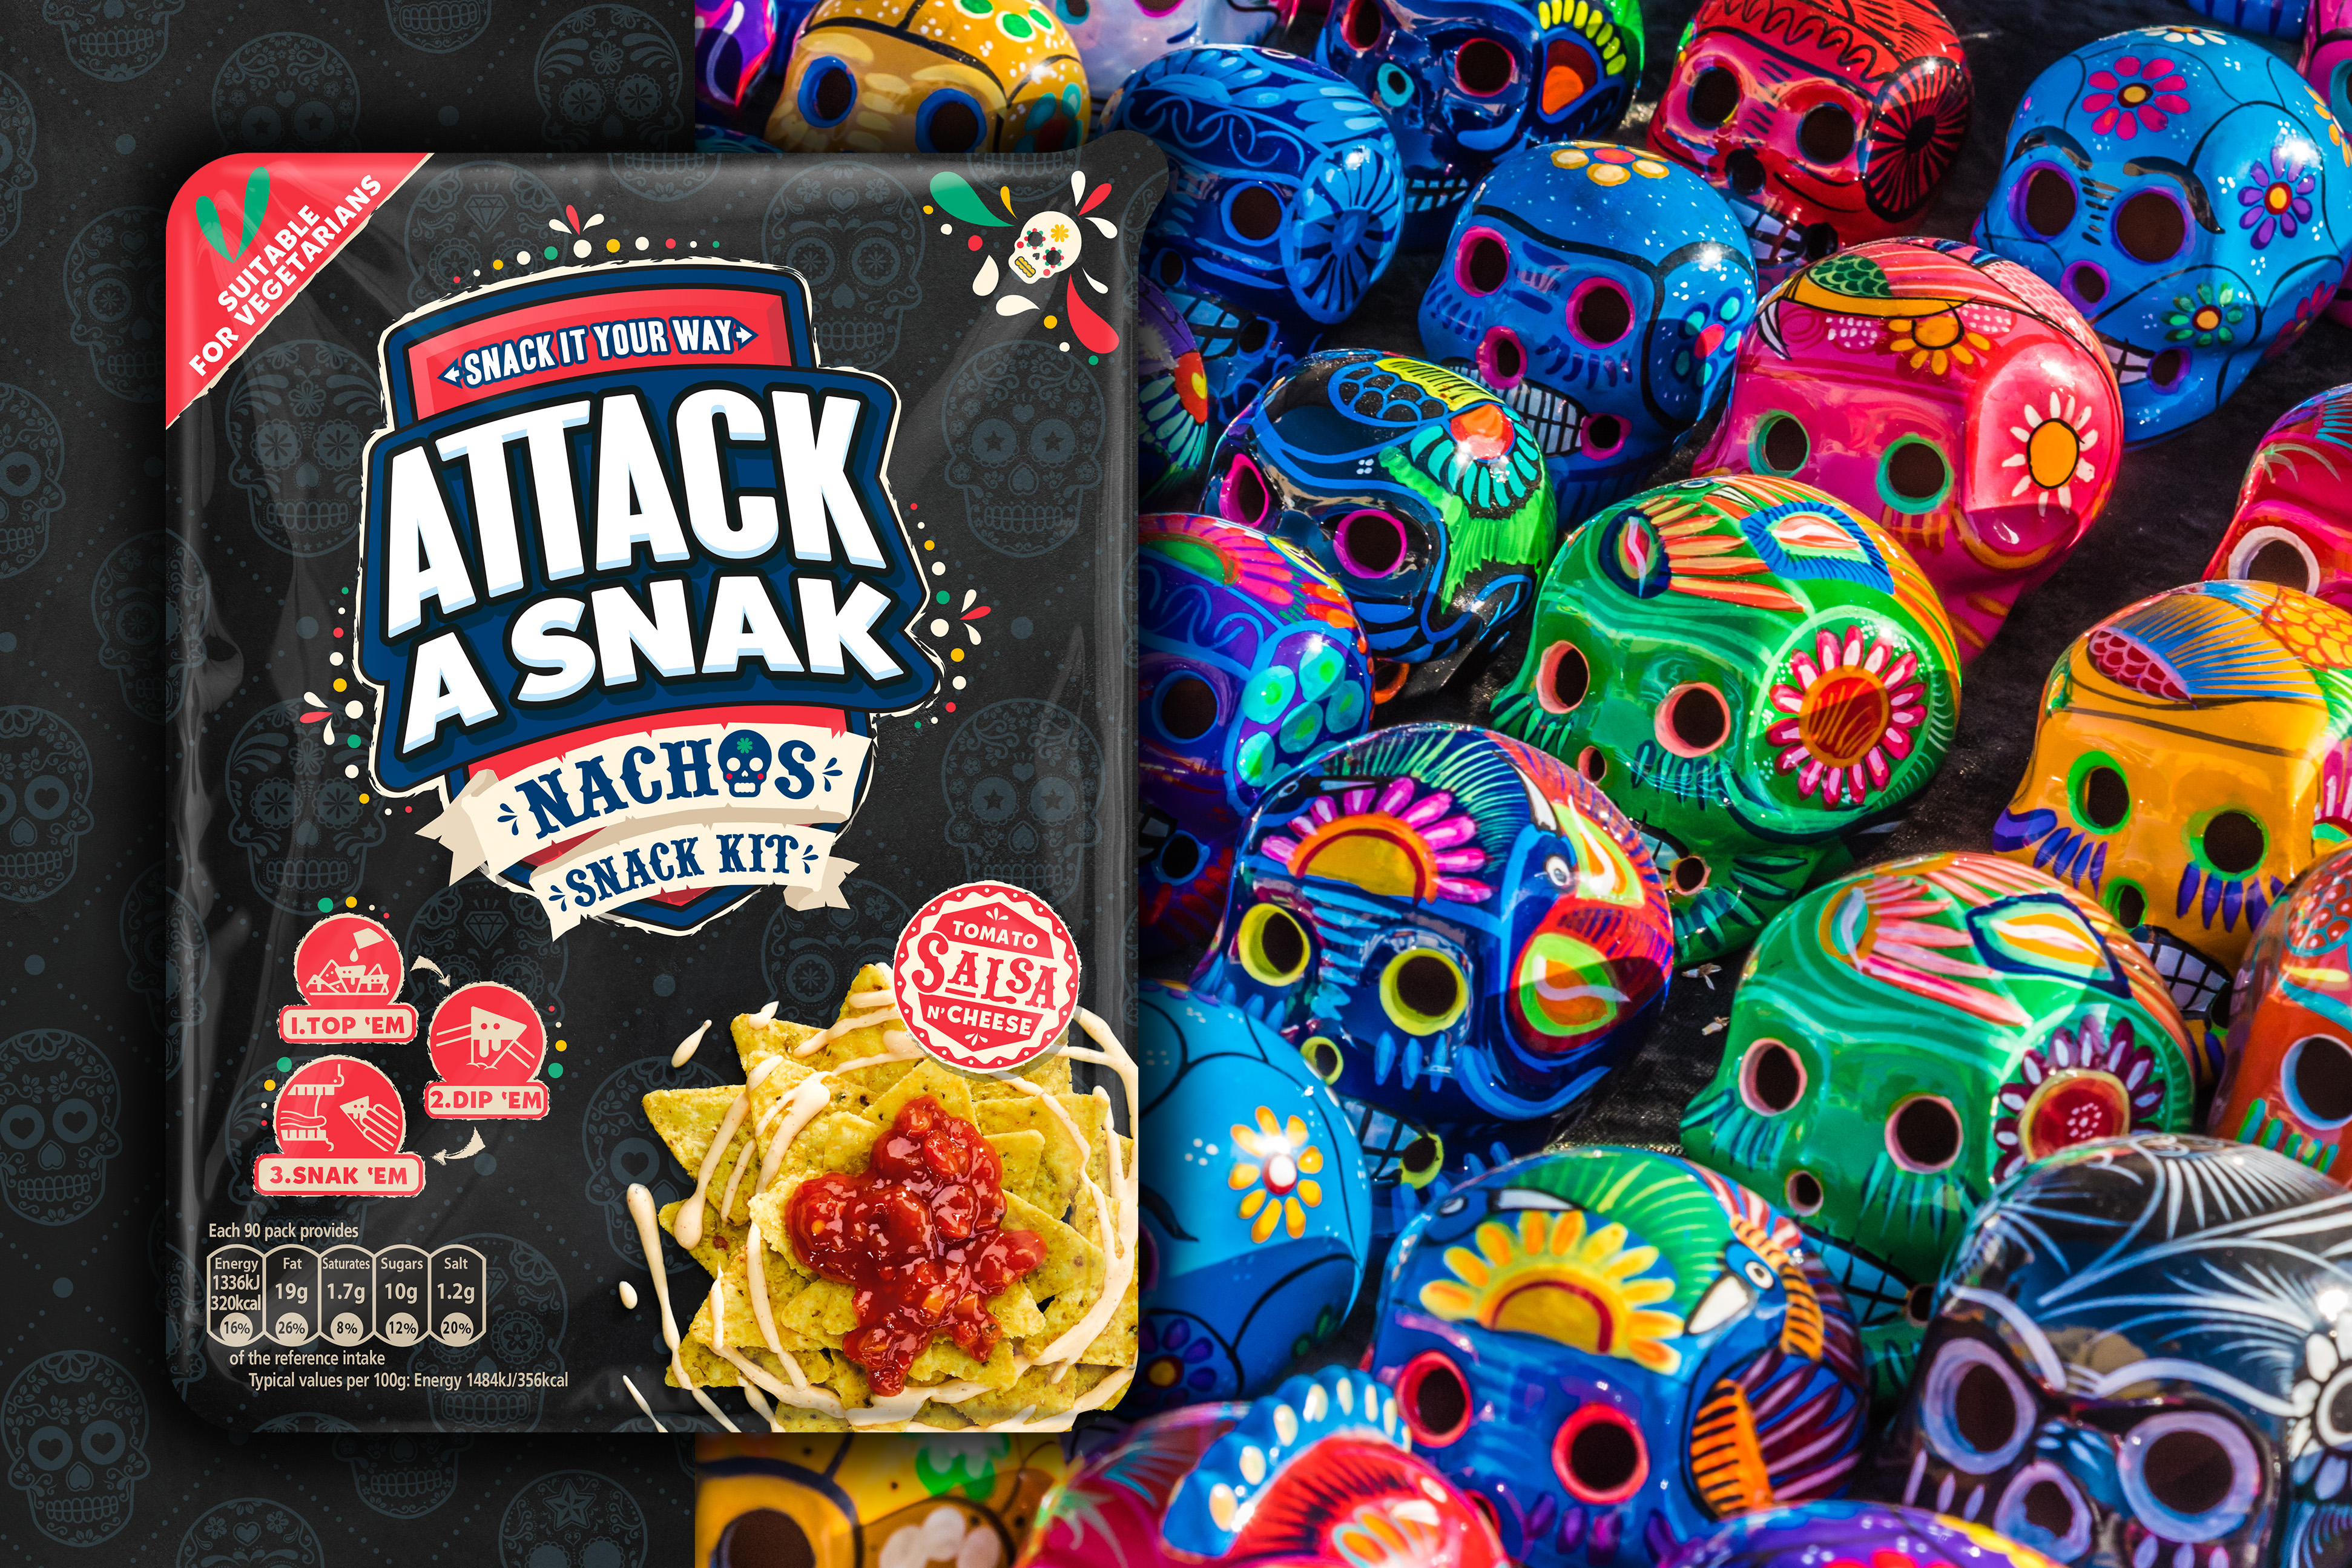 Wowme Design Brings a New Attack a Snak Pack to Life